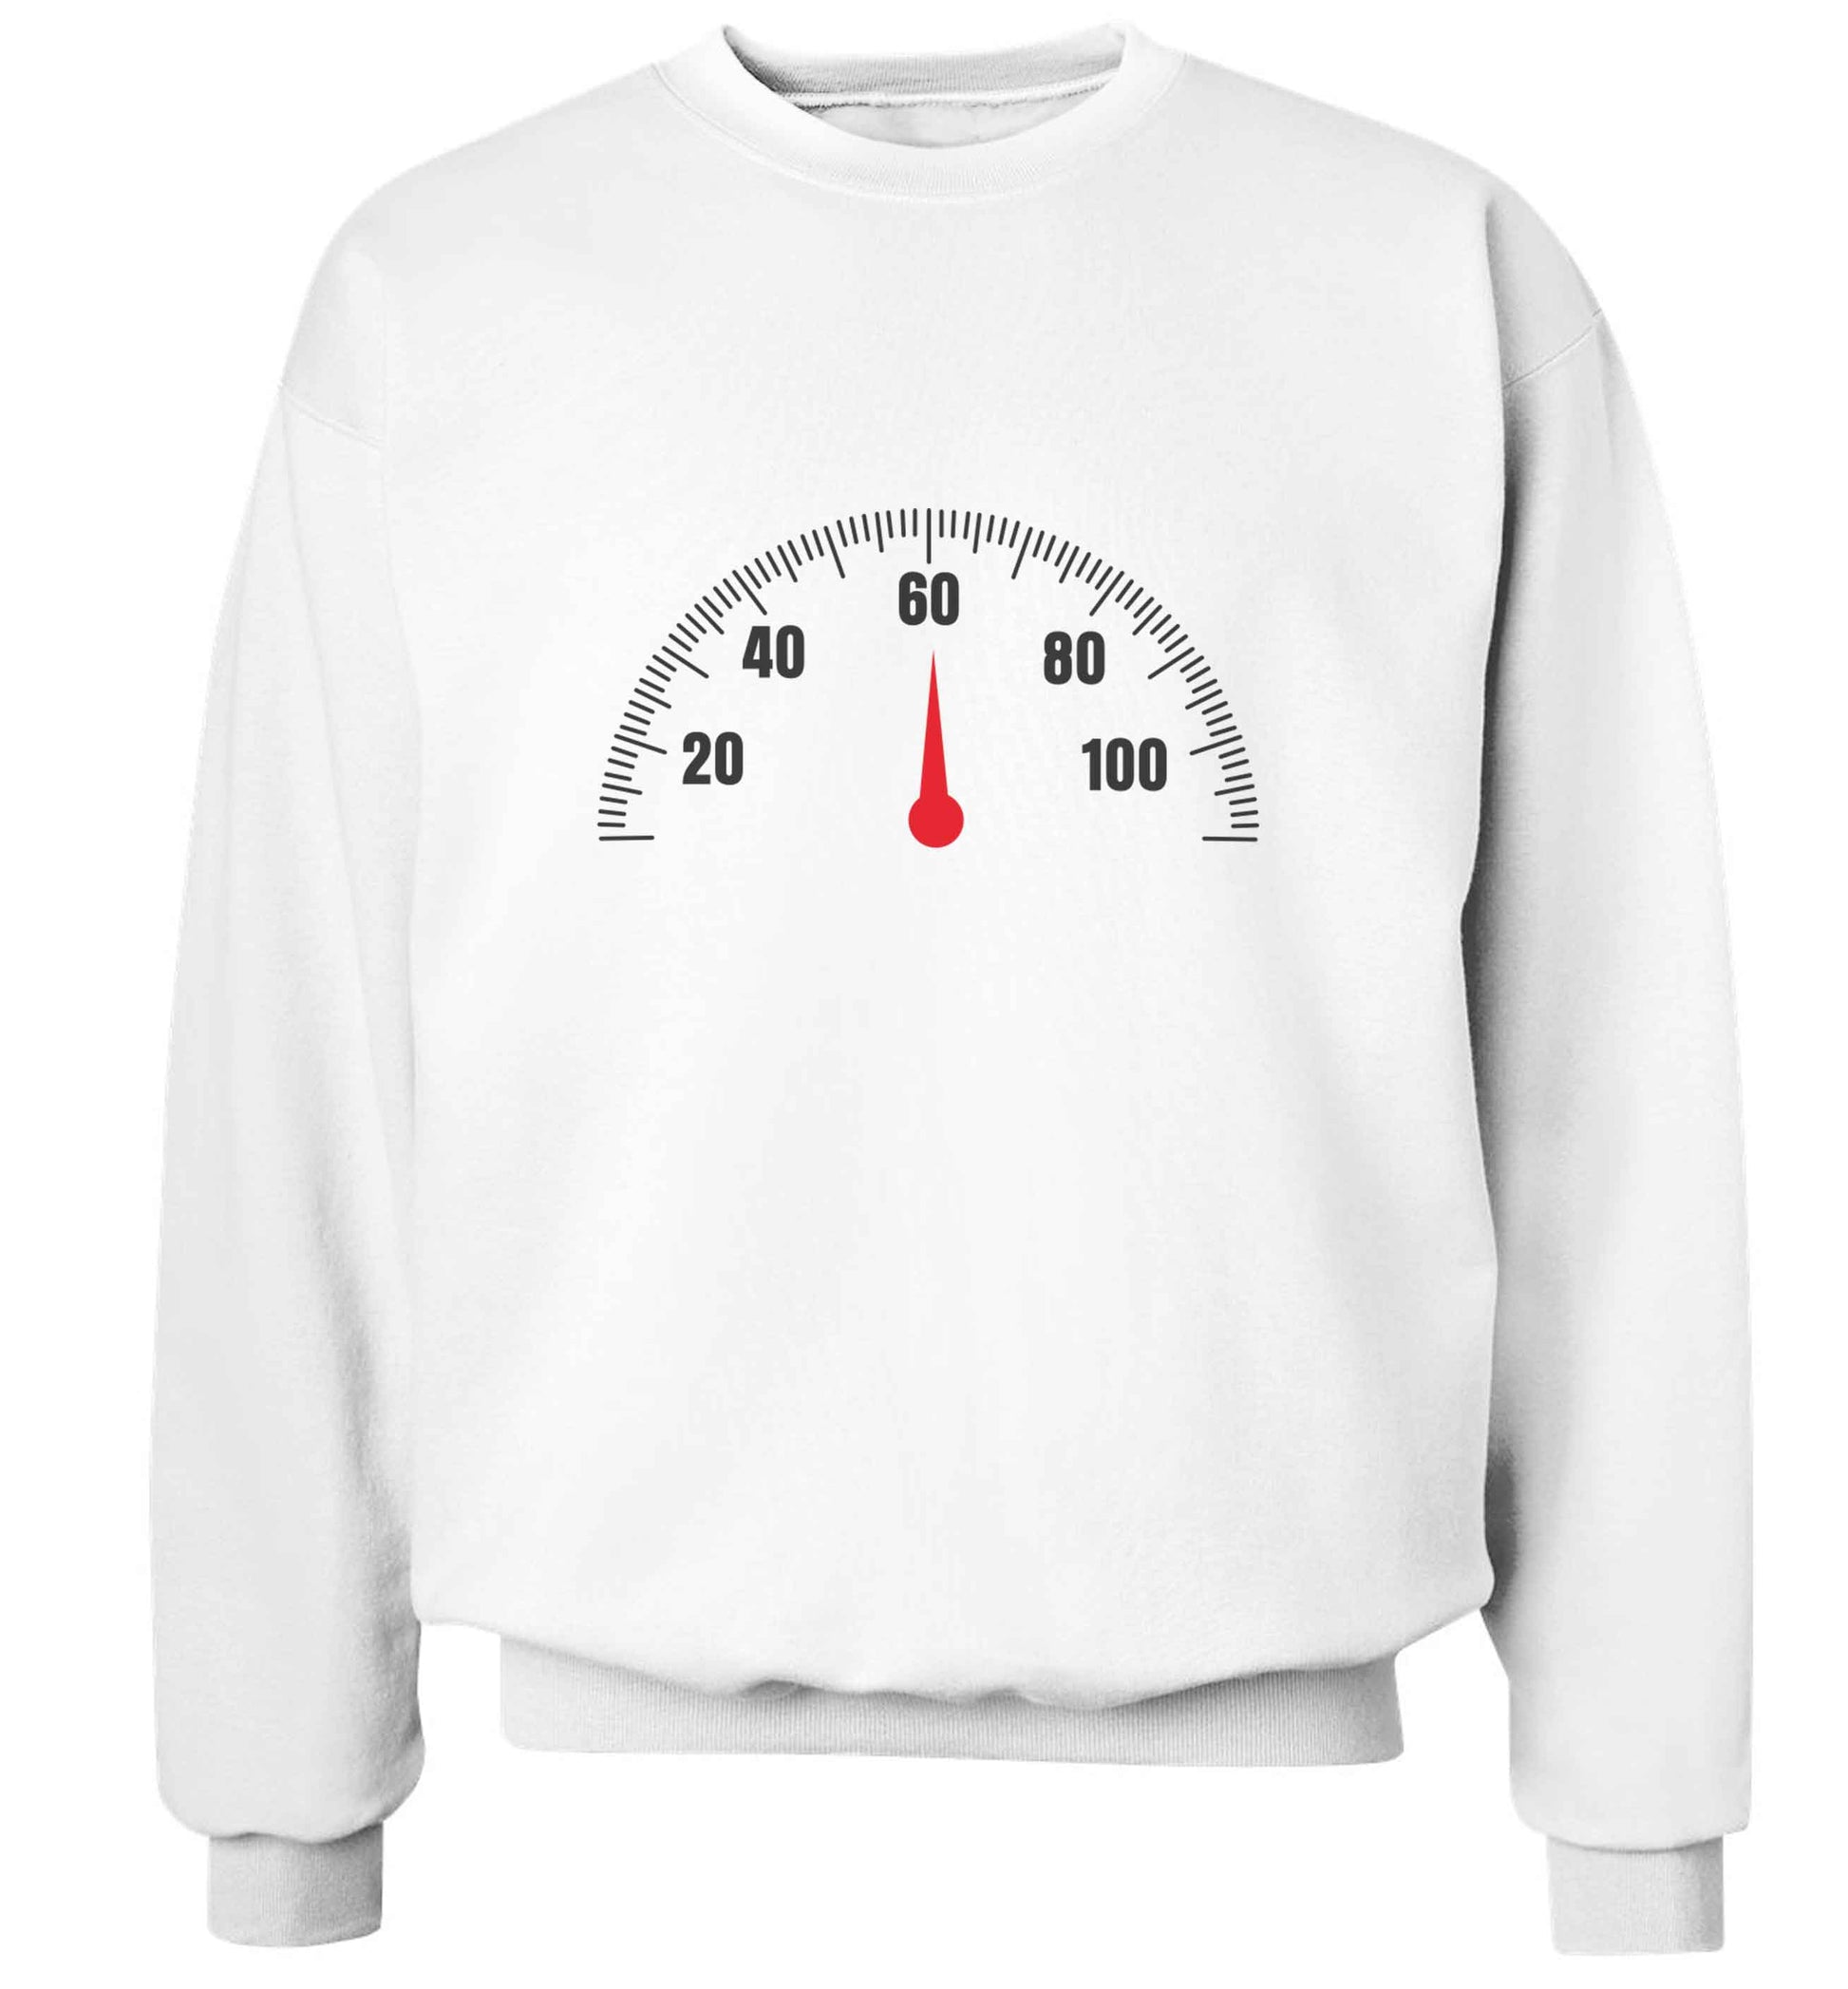 Speed dial 60 adult's unisex white sweater 2XL